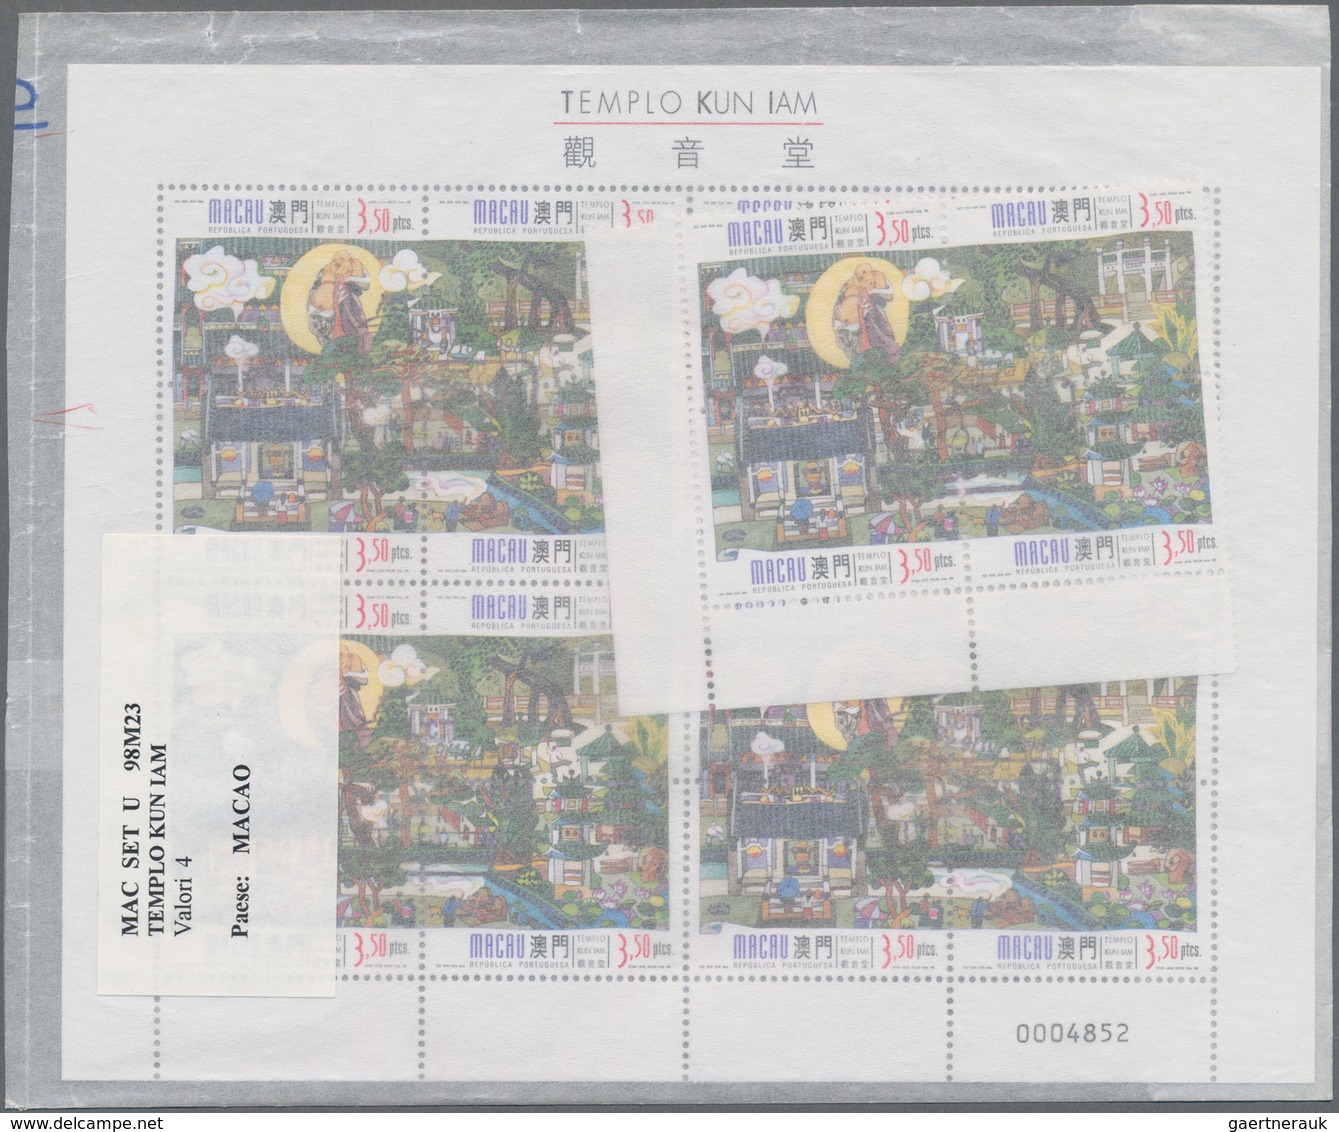 Macau: 1997/1998, small collection/accumulation mostly first day cancelled stamps and souvenir sheet